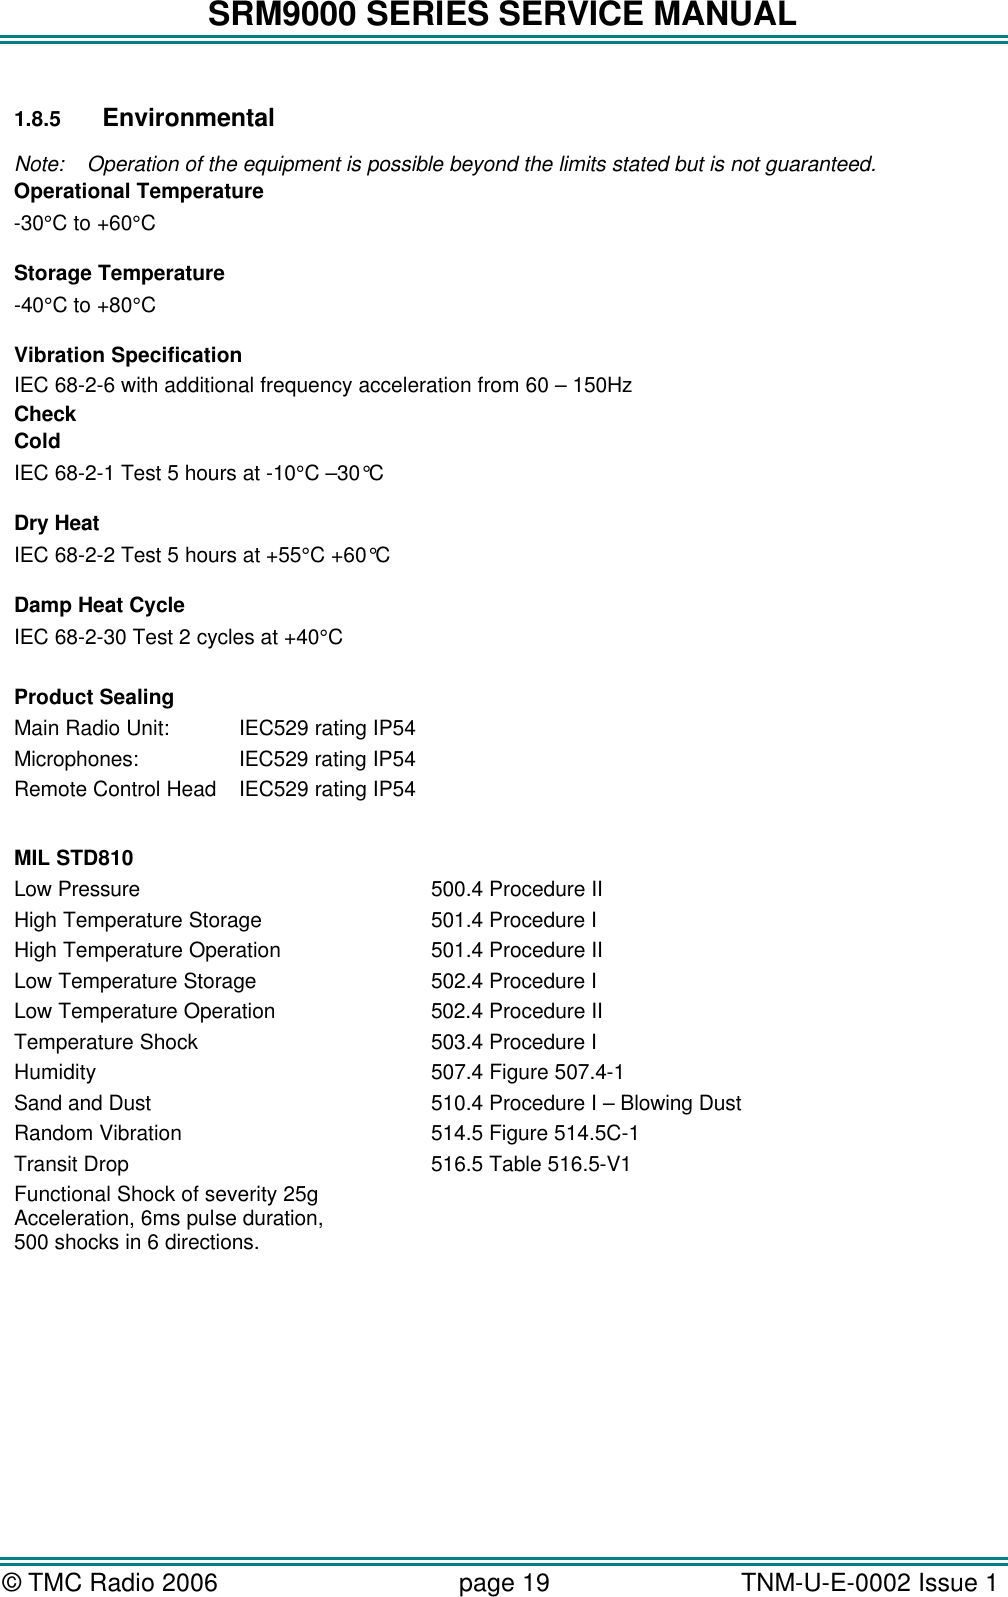 SRM9000 SERIES SERVICE MANUAL © TMC Radio 2006 page 19   TNM-U-E-0002 Issue 1   1.8.5 Environmental  Note: Operation of the equipment is possible beyond the limits stated but is not guaranteed. Operational Temperature -30°C to +60°C         Storage Temperature -40°C to +80°C        Vibration Specification IEC 68-2-6 with additional frequency acceleration from 60 – 150Hz Check      Cold IEC 68-2-1 Test 5 hours at -10°C –30°C        Dry Heat IEC 68-2-2 Test 5 hours at +55°C +60°C        Damp Heat Cycle IEC 68-2-30 Test 2 cycles at +40°C        Product Sealing Main Radio Unit: IEC529 rating IP54 Microphones:    IEC529 rating IP54 Remote Control Head IEC529 rating IP54  MIL STD810 Low Pressure 500.4 Procedure II High Temperature Storage 501.4 Procedure I High Temperature Operation 501.4 Procedure II Low Temperature Storage 502.4 Procedure I Low Temperature Operation 502.4 Procedure II Temperature Shock 503.4 Procedure I Humidity 507.4 Figure 507.4-1 Sand and Dust 510.4 Procedure I – Blowing Dust Random Vibration 514.5 Figure 514.5C-1 Transit Drop 516.5 Table 516.5-V1 Functional Shock of severity 25g   Acceleration, 6ms pulse duration, 500 shocks in 6 directions.  